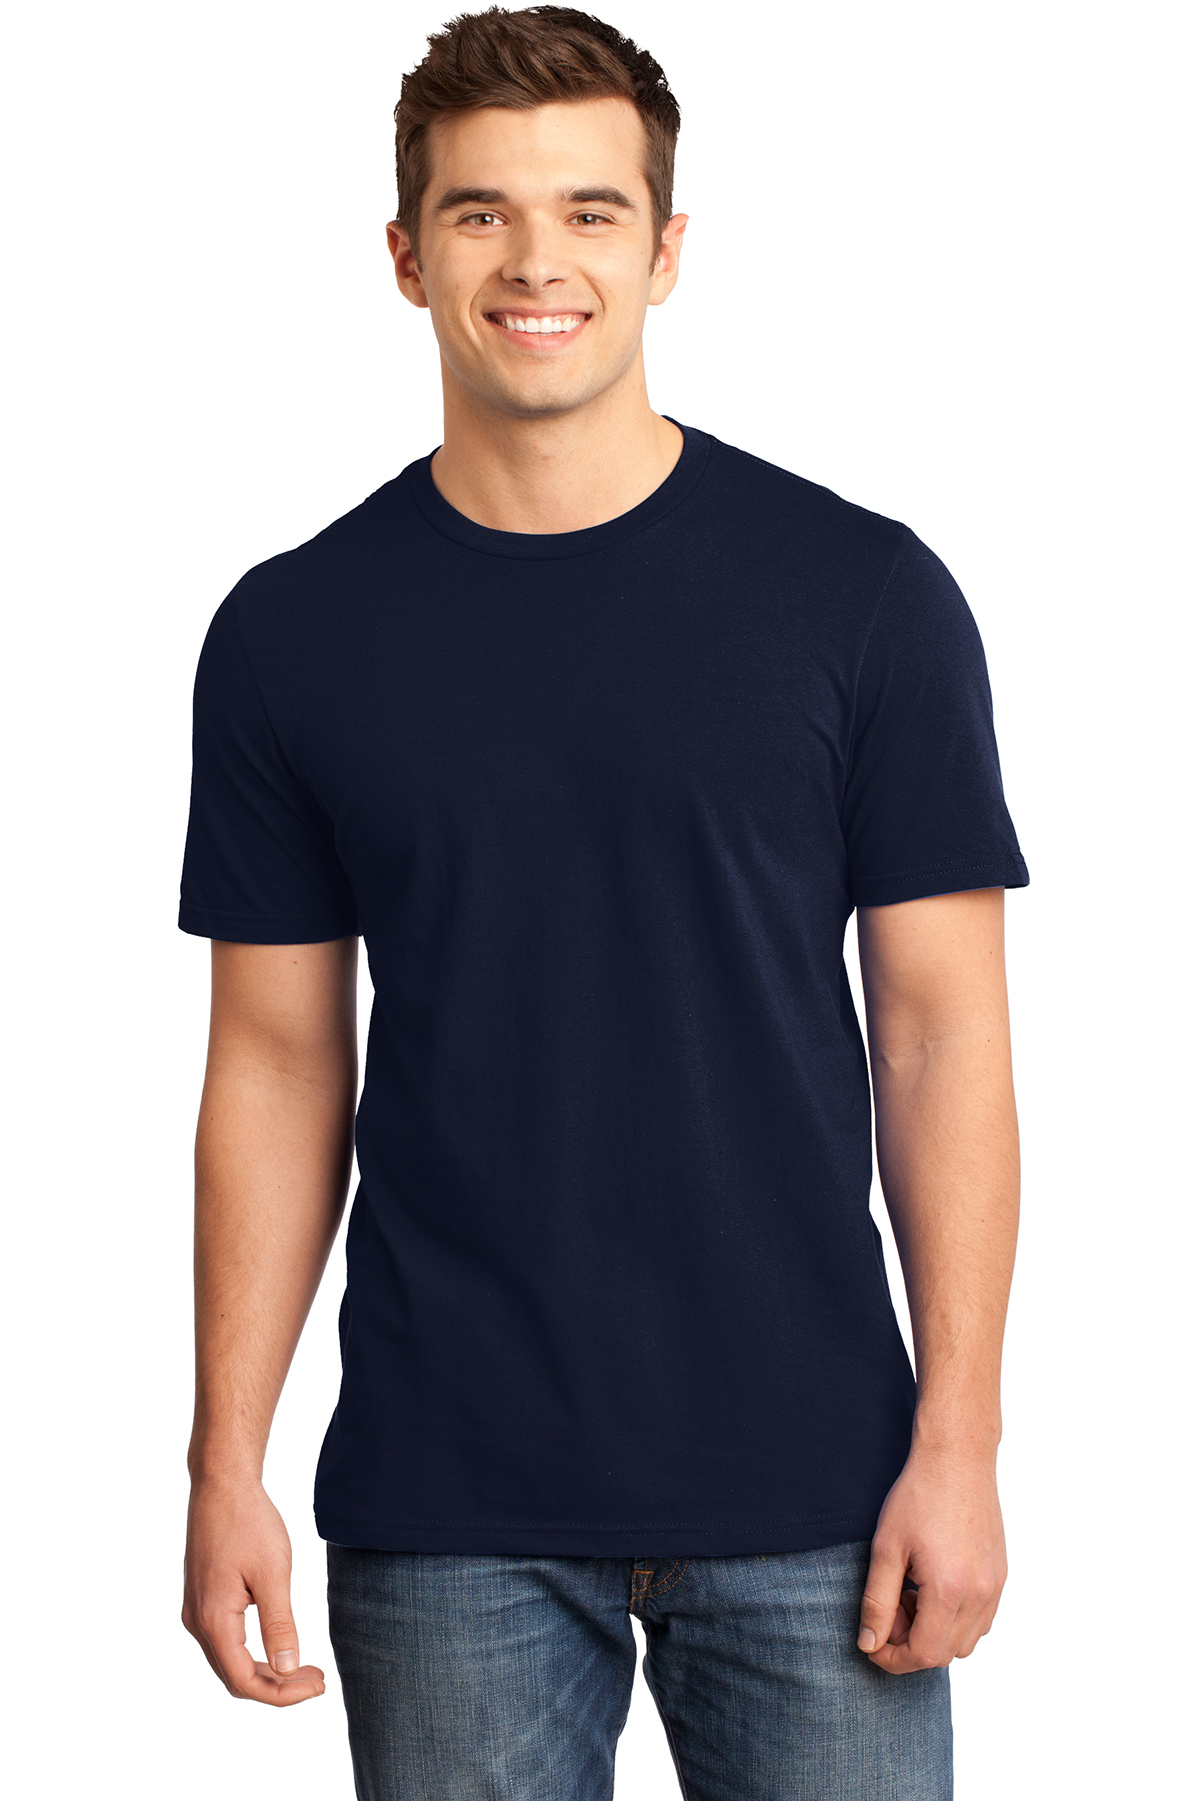 District DT6000 - Men's Very Important Tee - T-Shirts